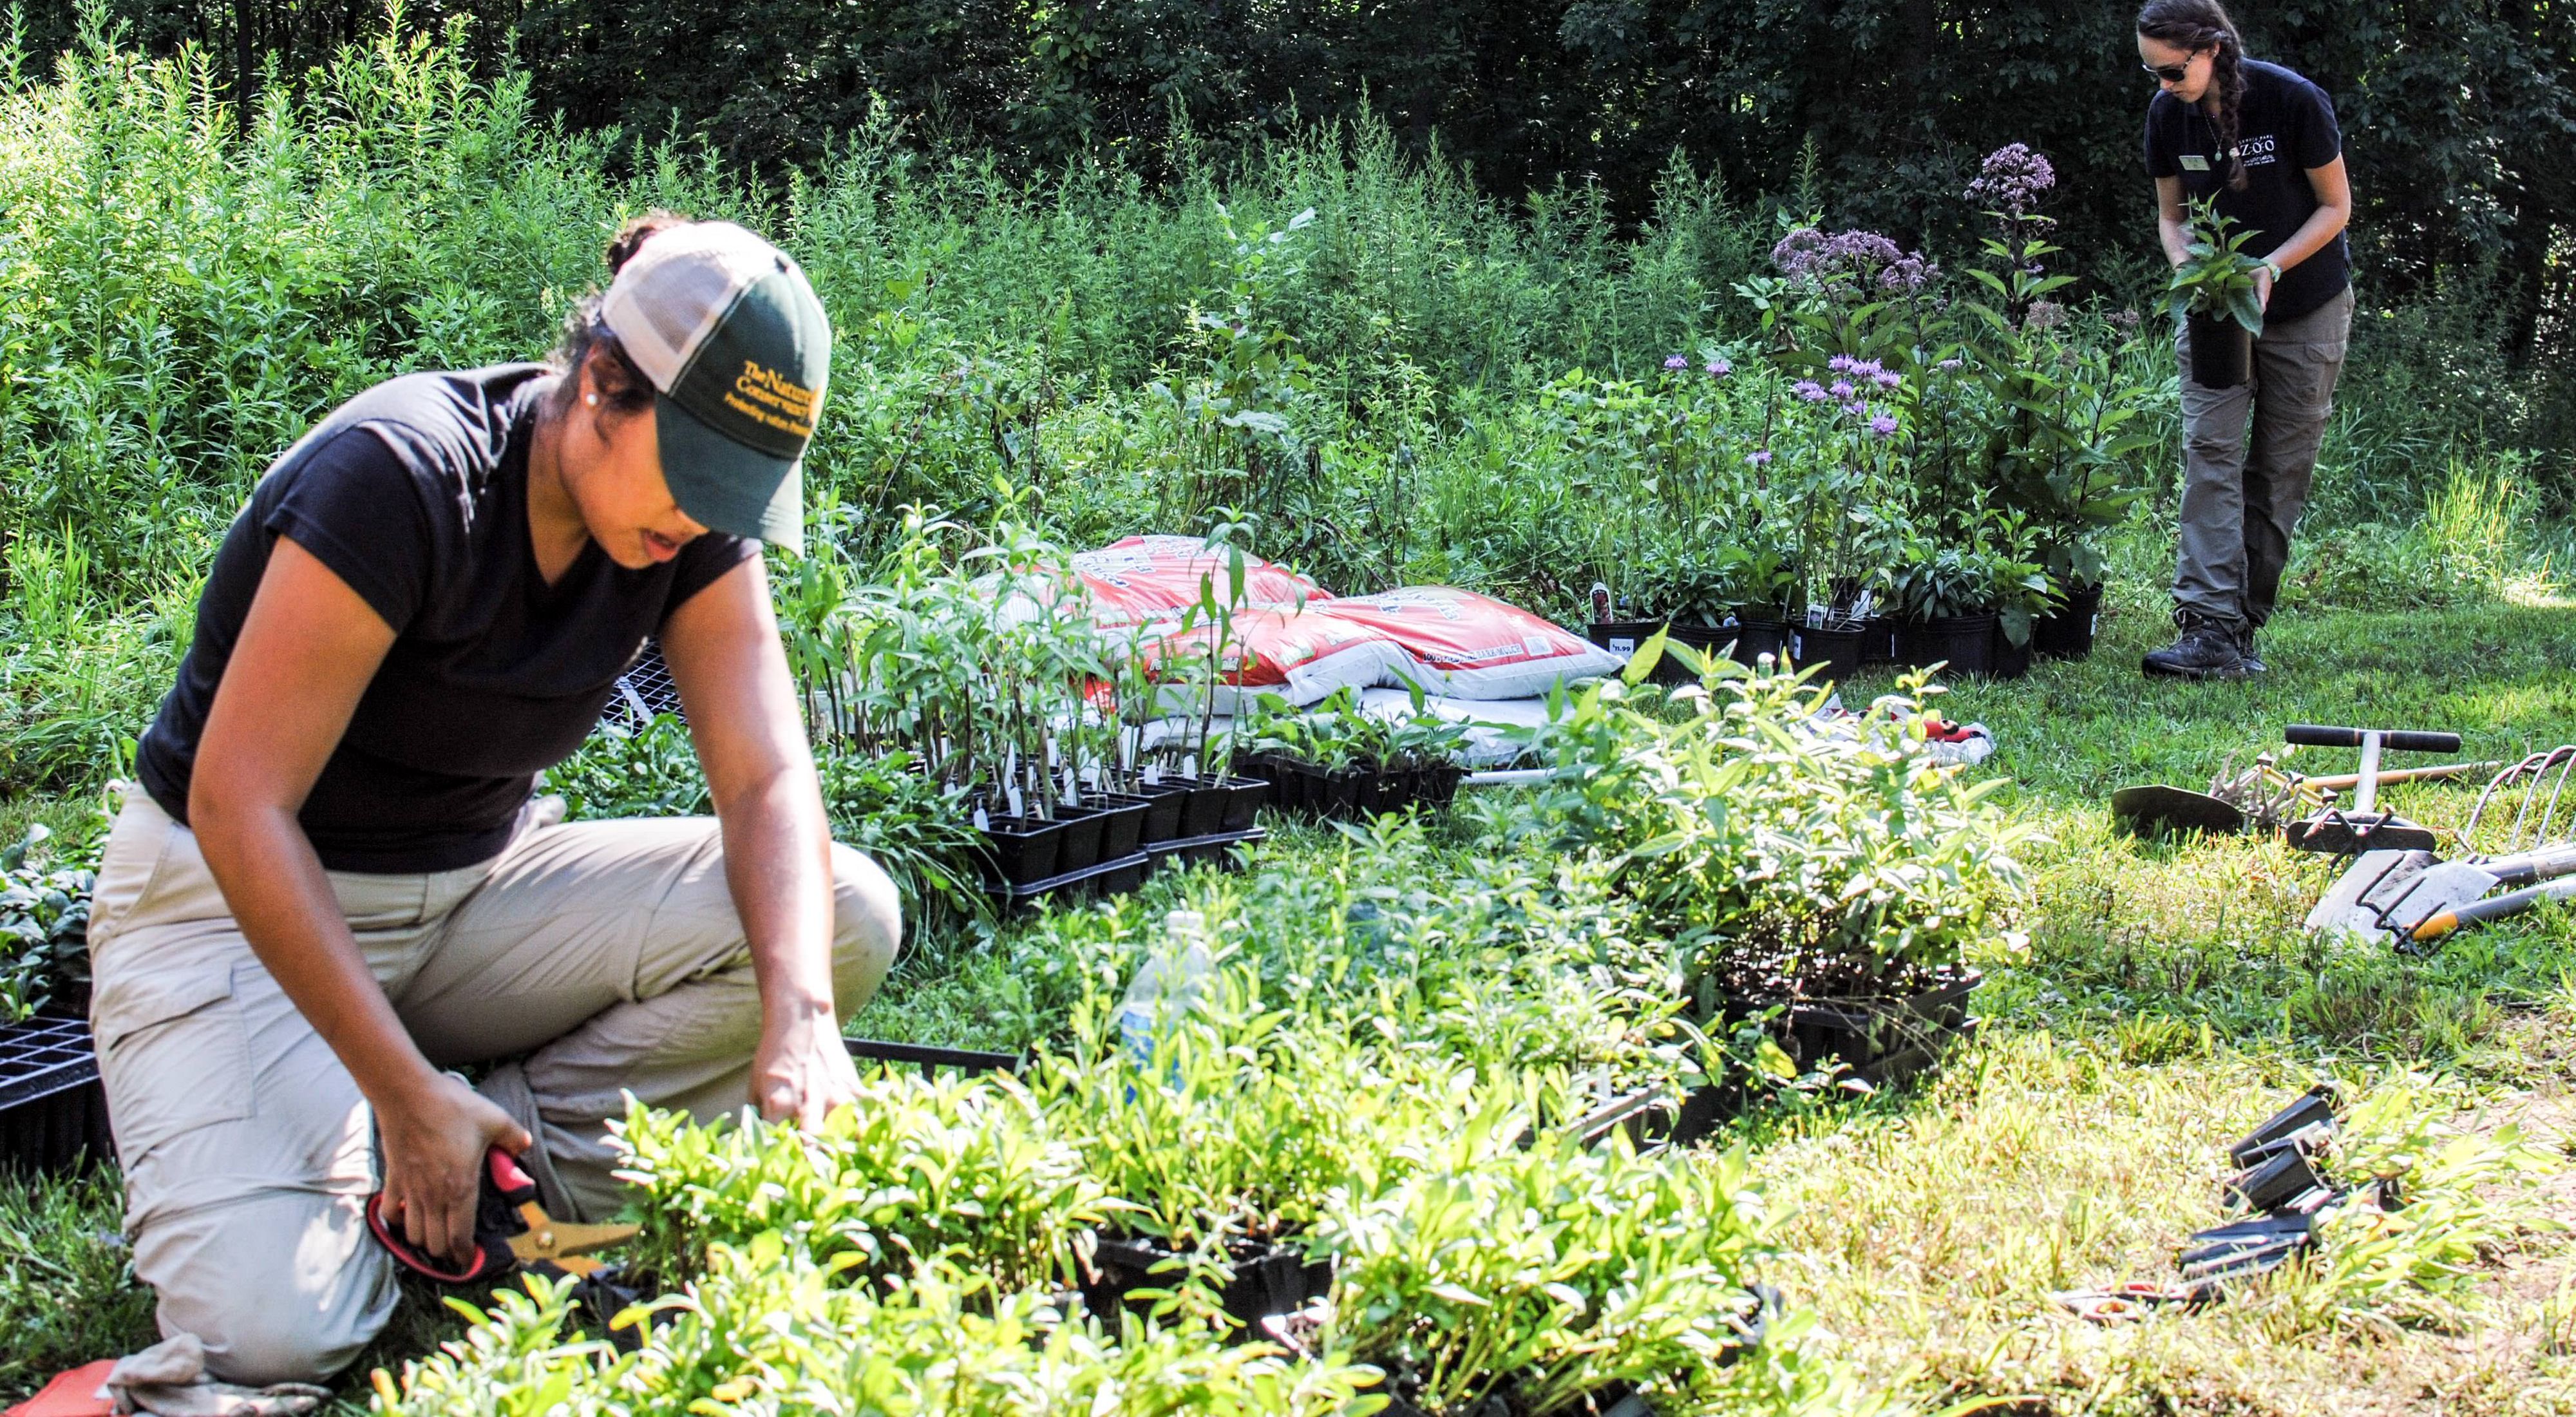 A woman pruning a row of plants in a garden.